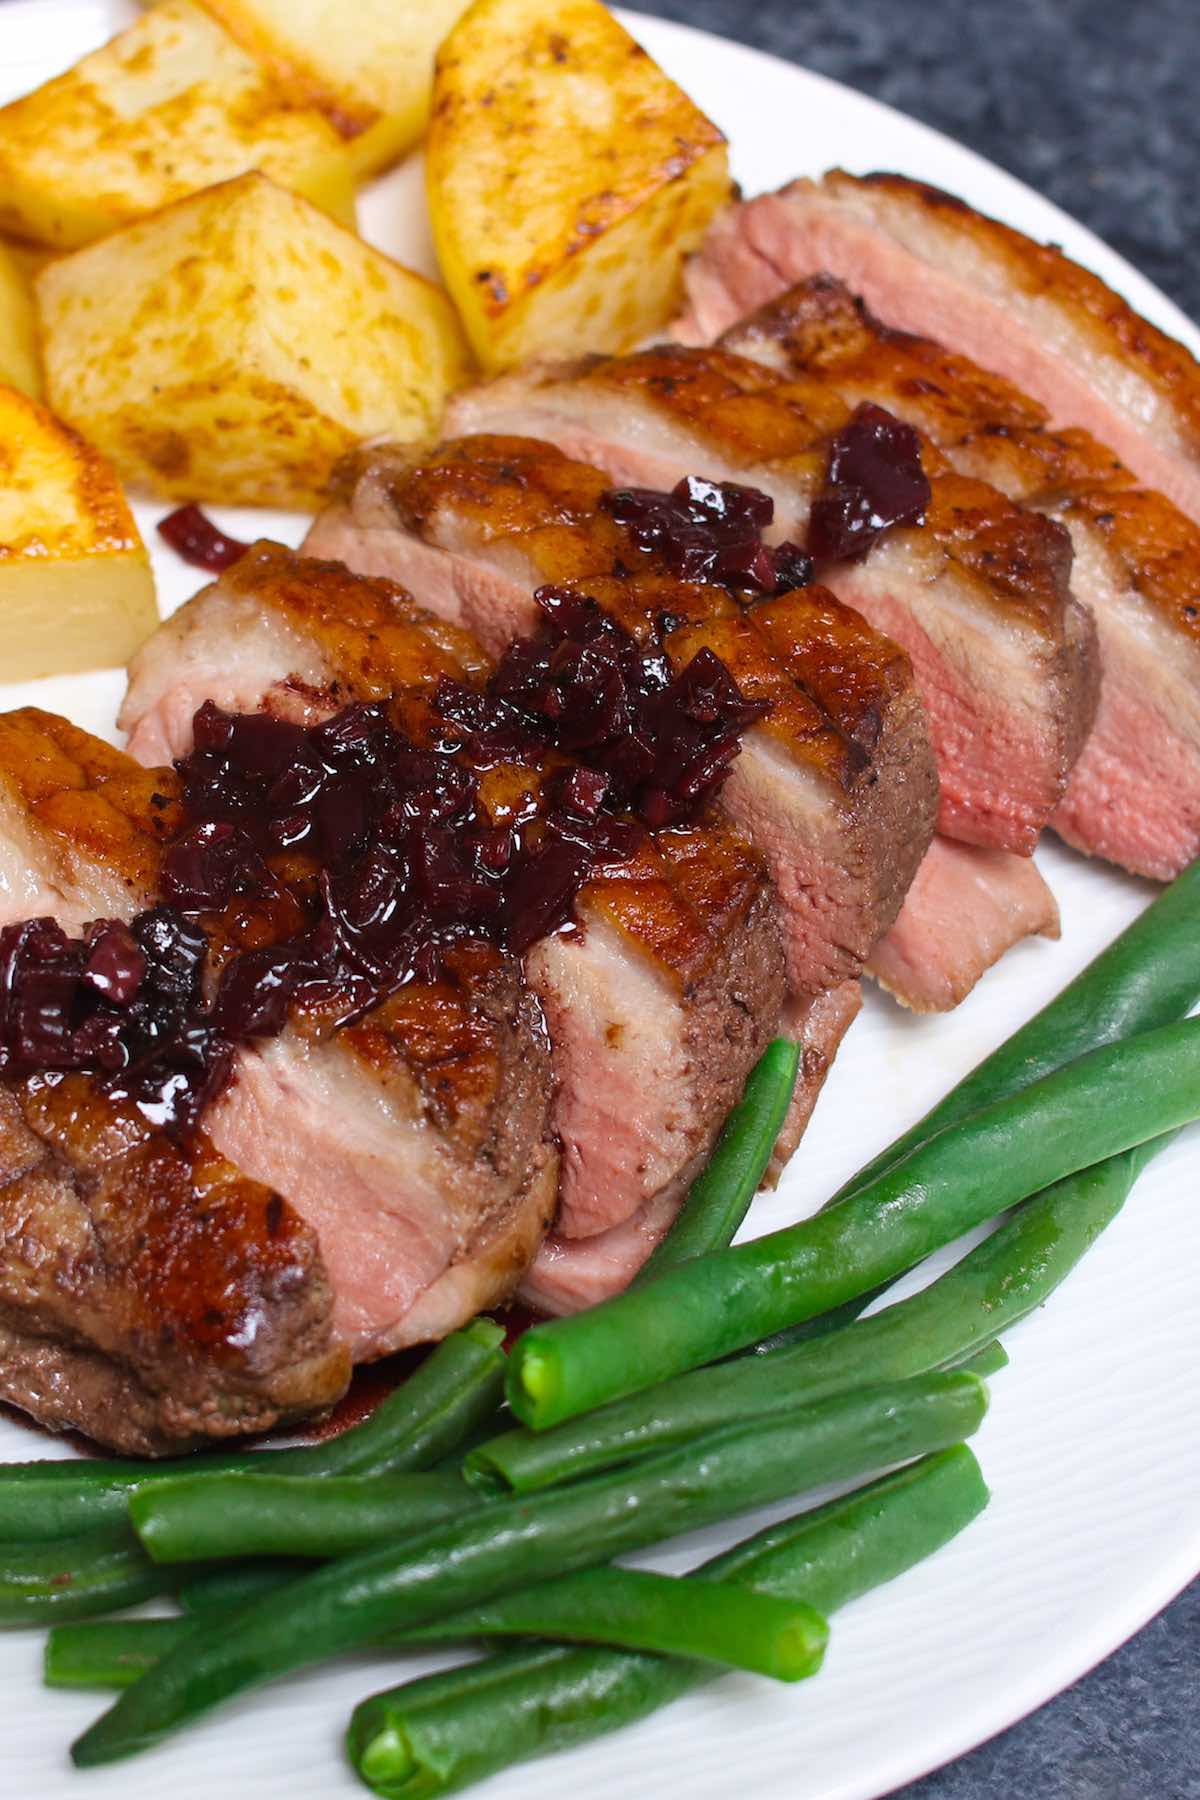 Sliced Sous Vide Duck Breast served with potatoes and green beans on a white plate.